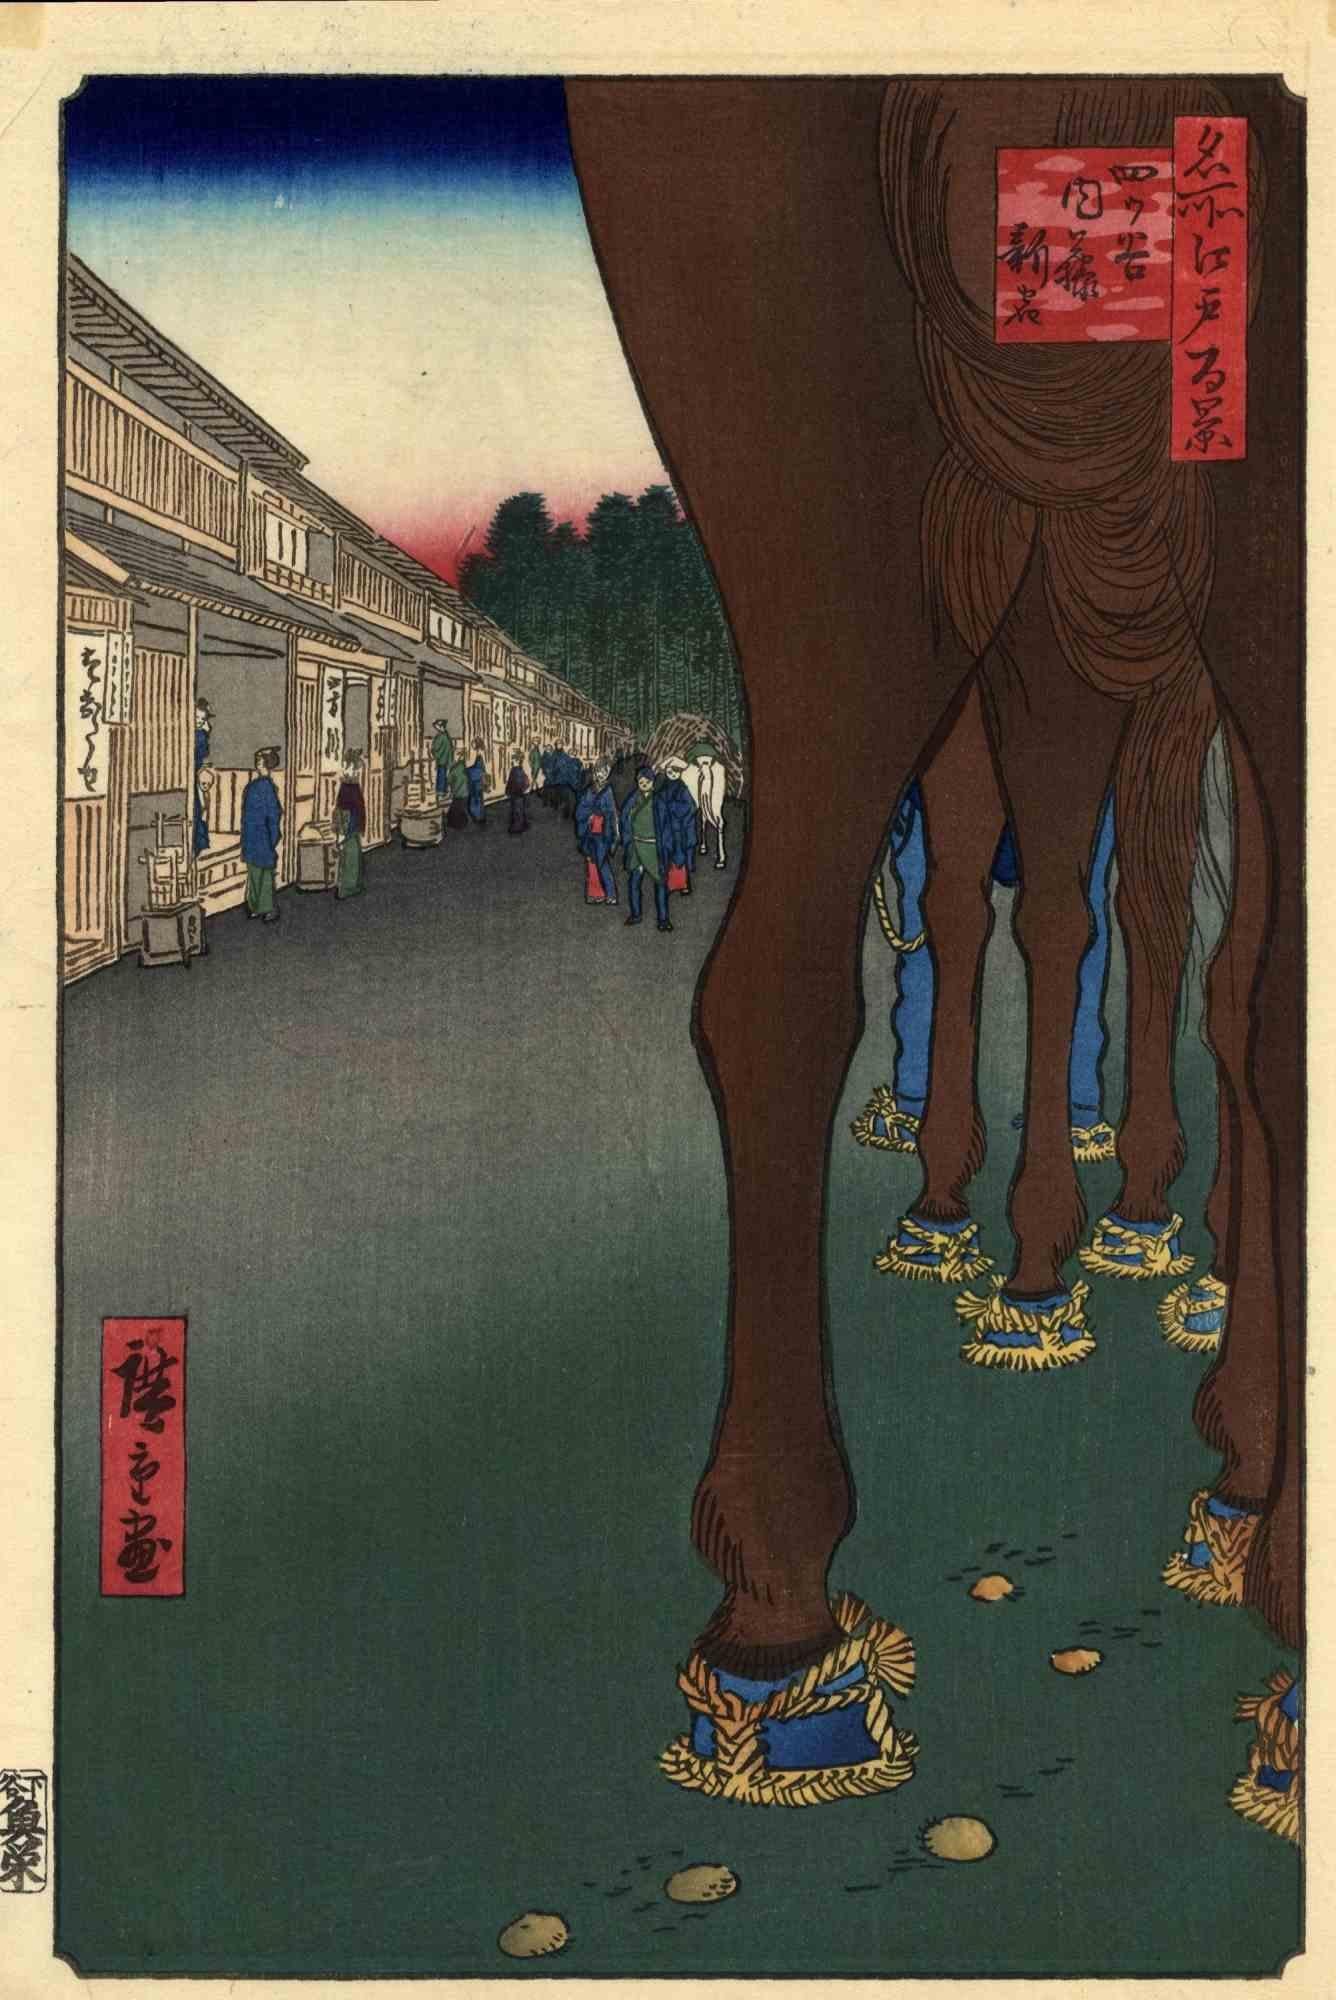 Meishoe is an original modern artwork realized by Utagawa Hiroshige (1797 – 1858) in the 1840s and reprinted in the late 19th Century.

Reprint of the Meijiperiod. 

Oban. Dimensions: 38 x 24.5 cm.

From the famous series of 100 views of Edo, view